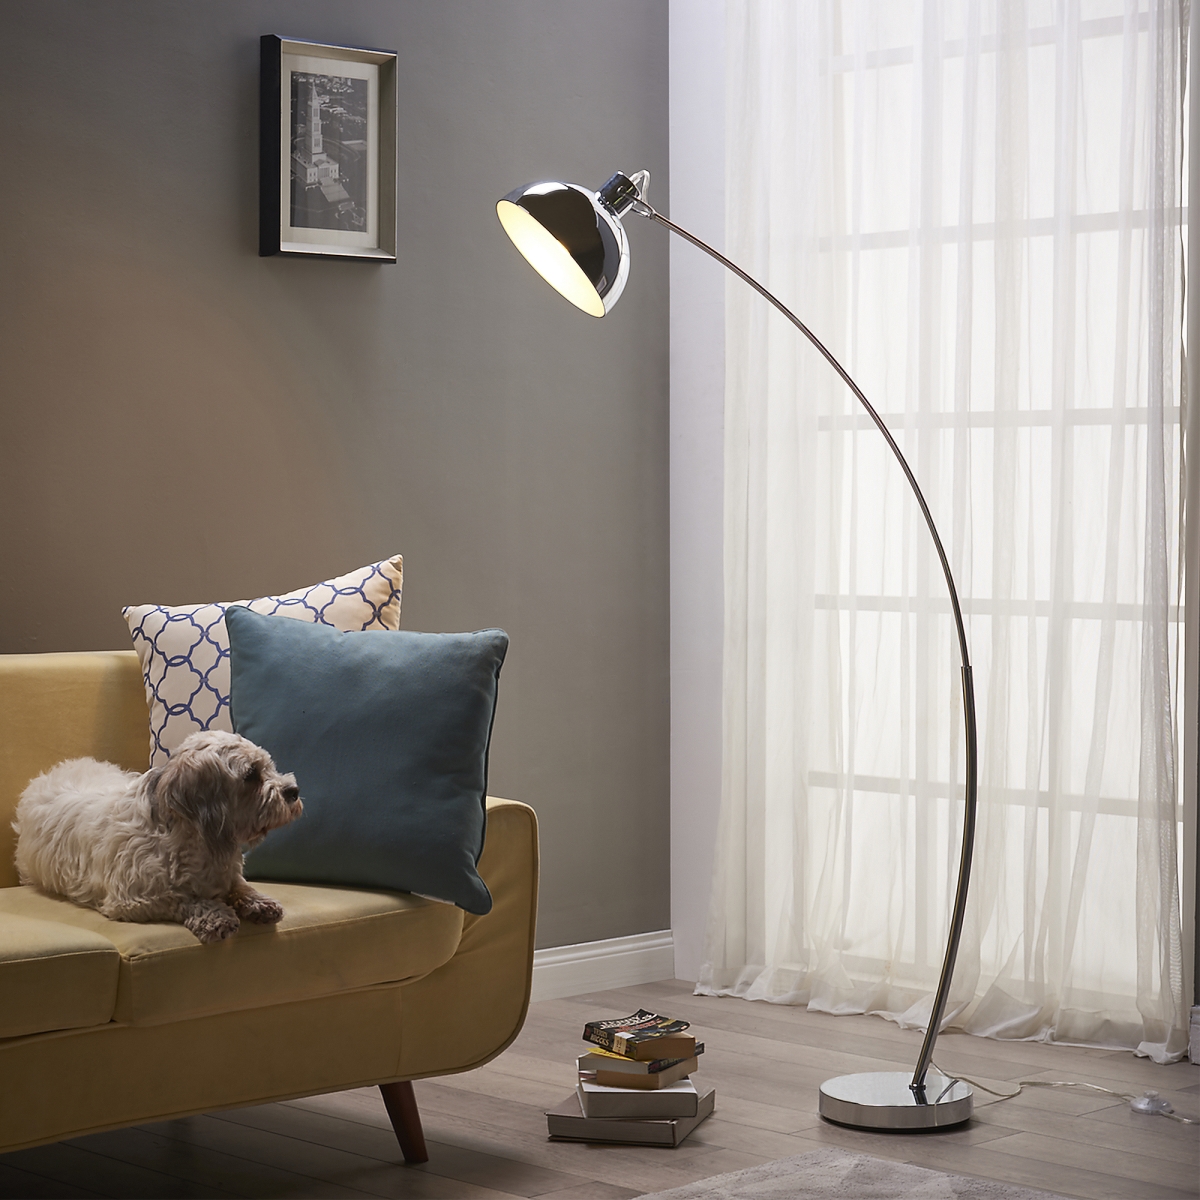 Vn-l00024 Arco Floor Lamp With Shade, Chrome